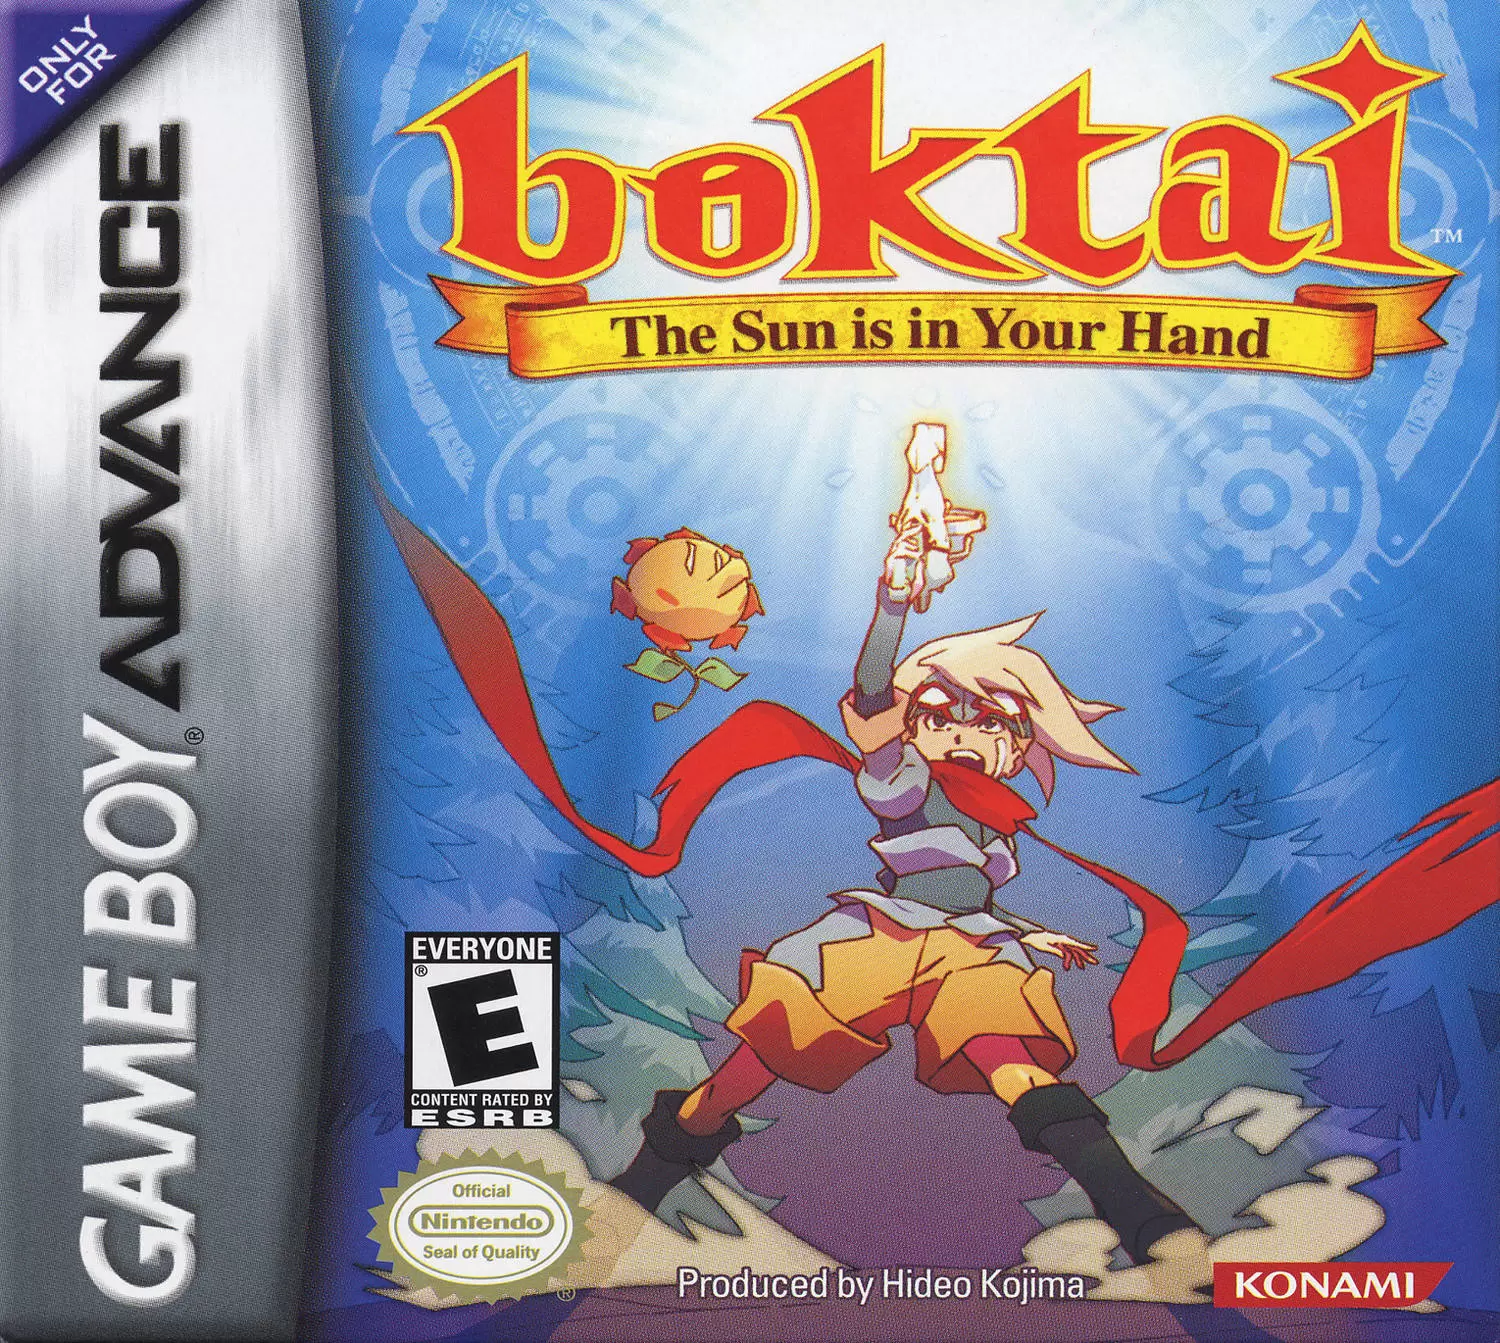 Game Boy Advance Games - Boktai - The Sun in your Hand